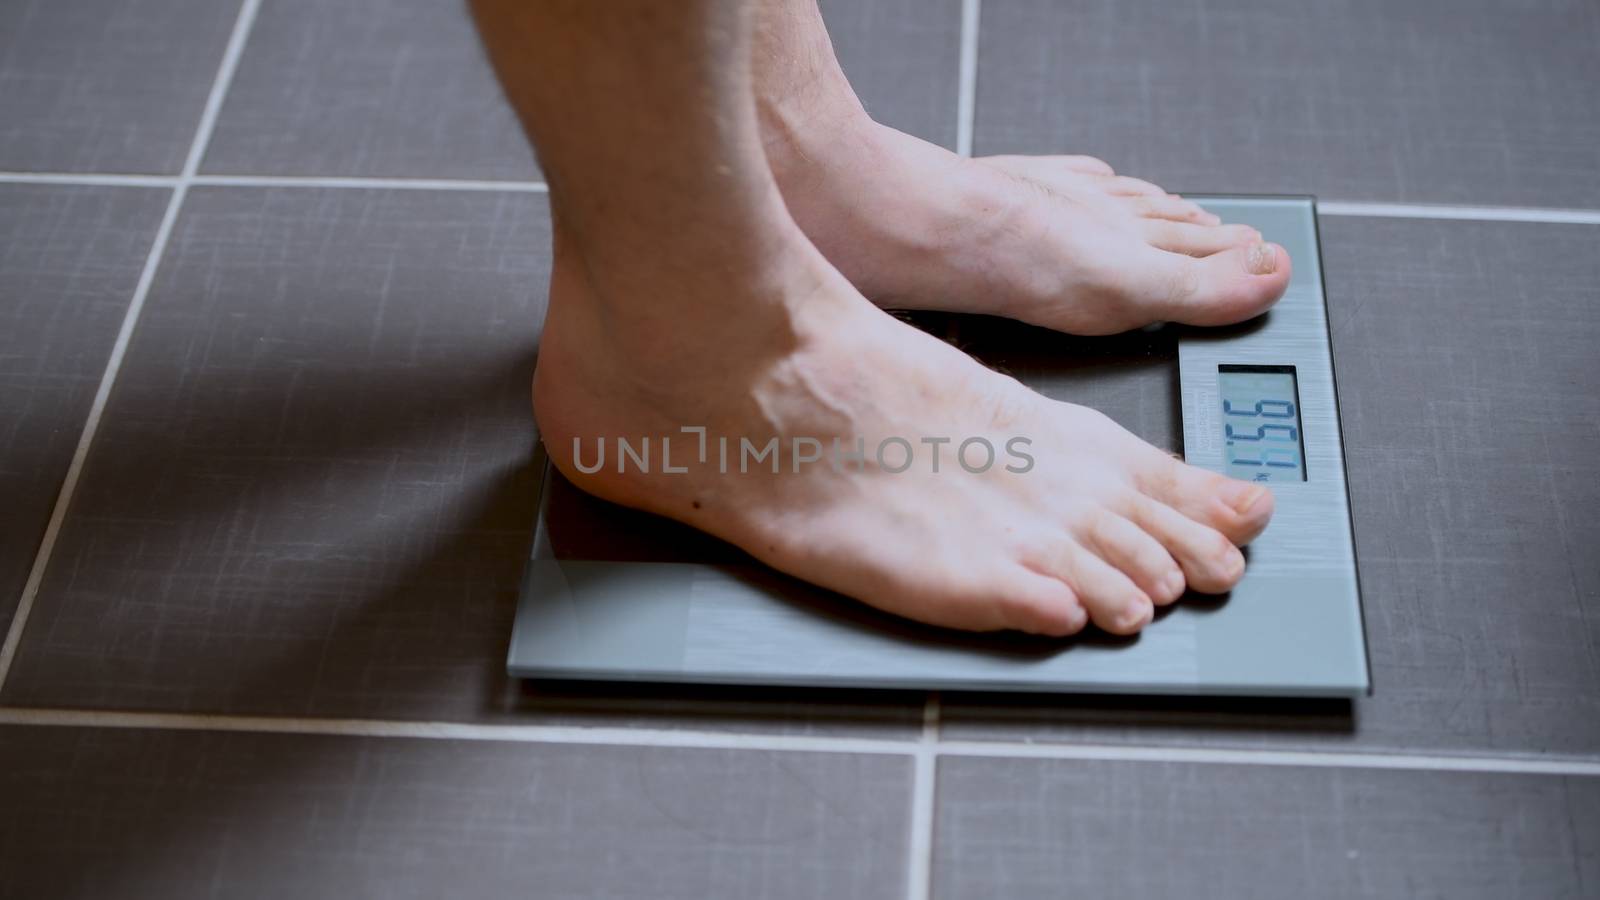 Male feet on glass scales, men's diet, body weight, close up, man standing on scale